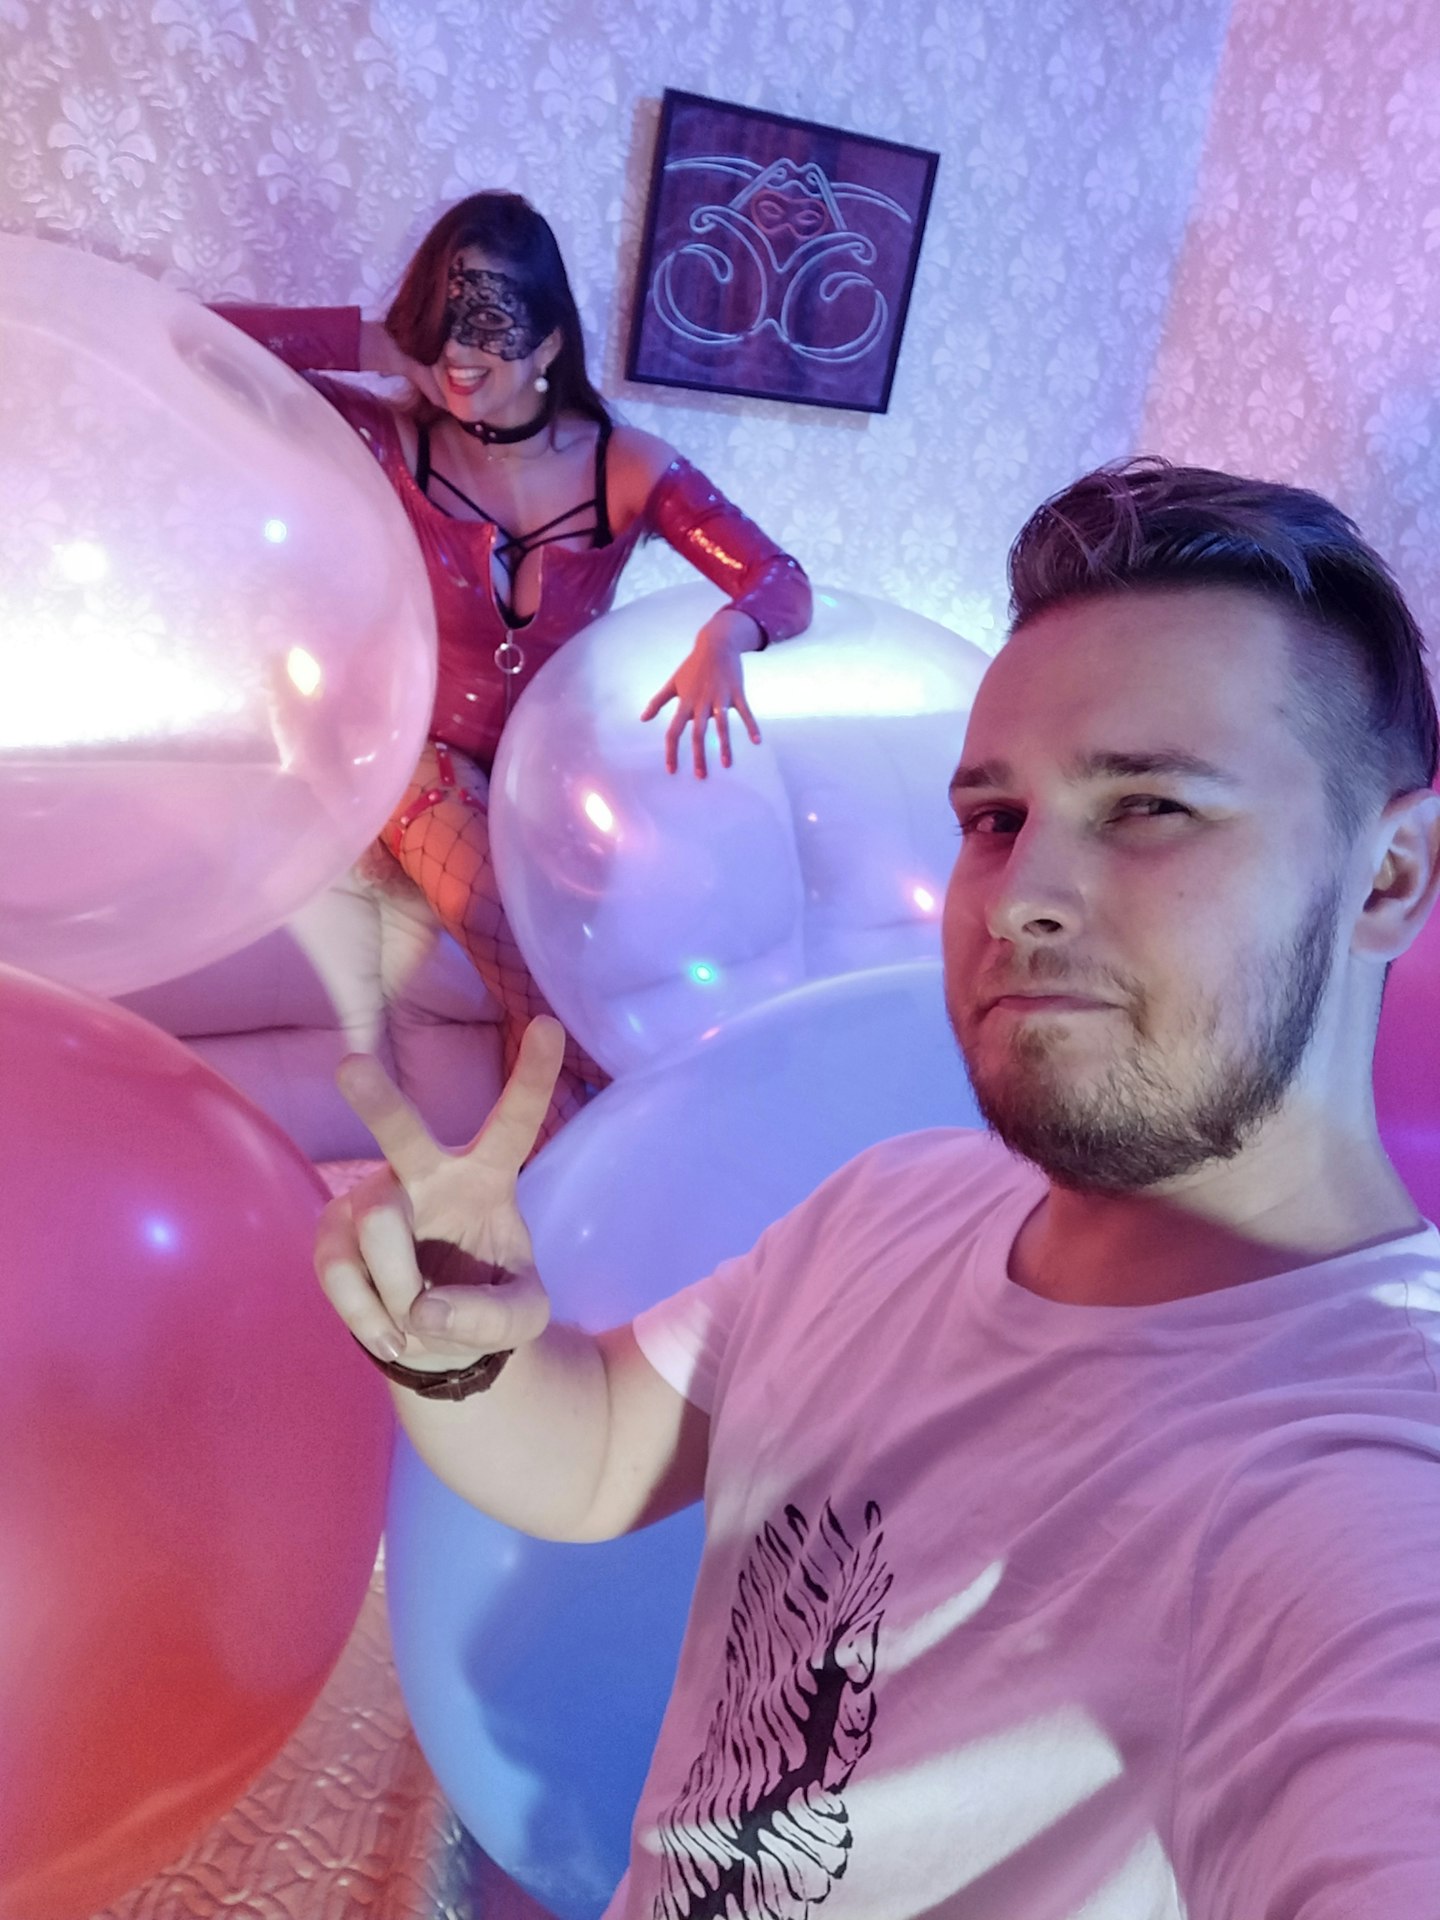 'I earn 10k month having sex with balloons'